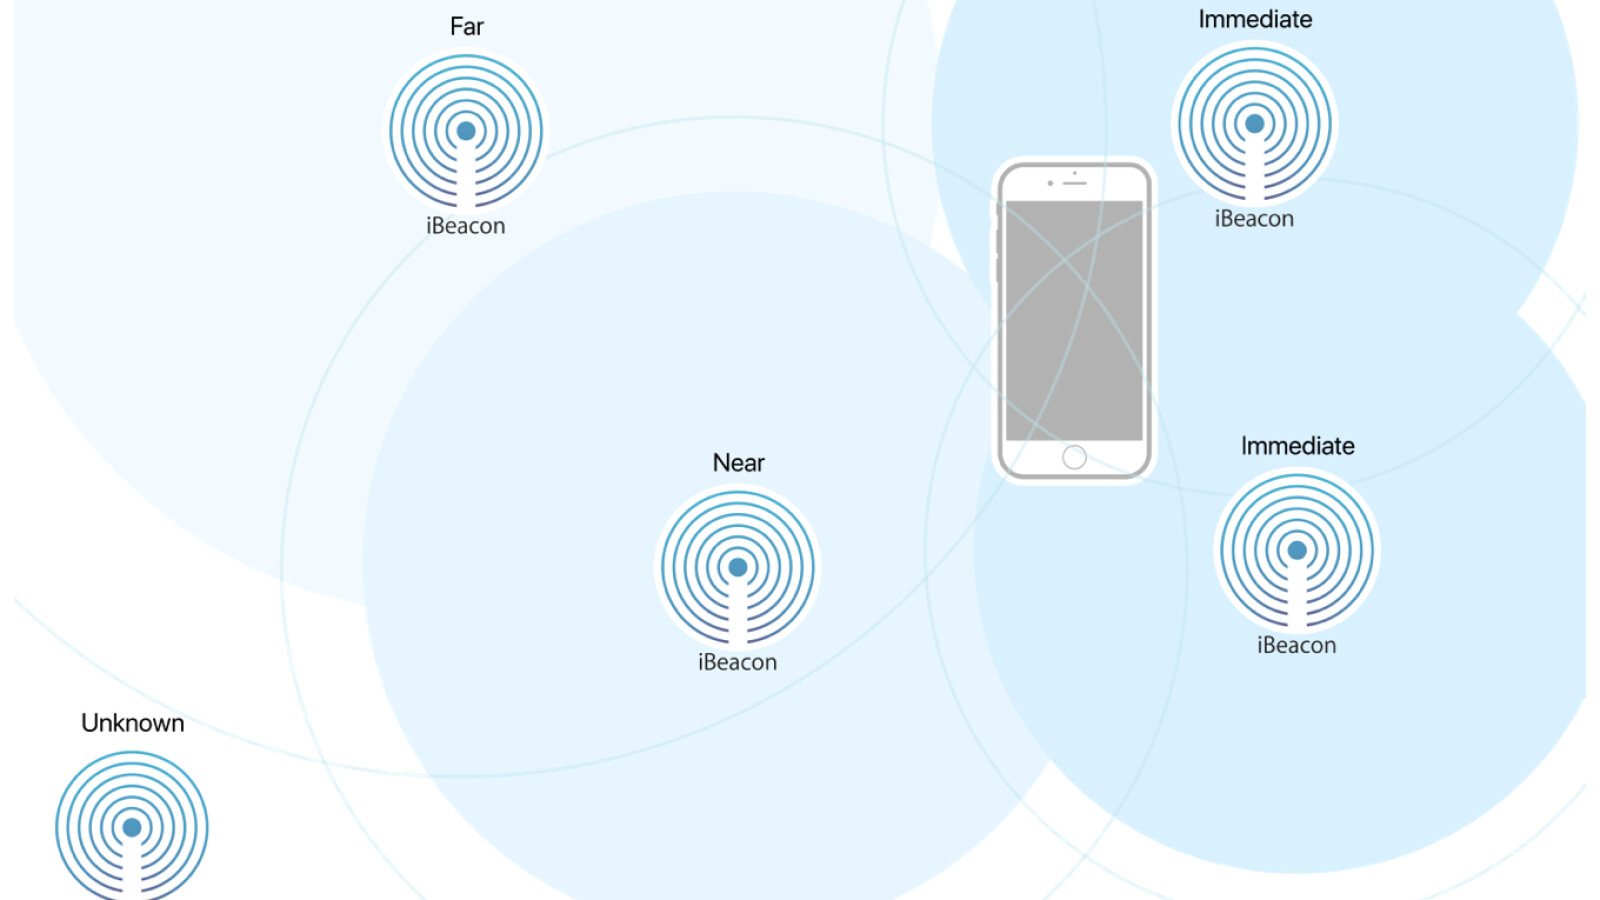 Presence/absence detection with iBeacon: This is how the technology works